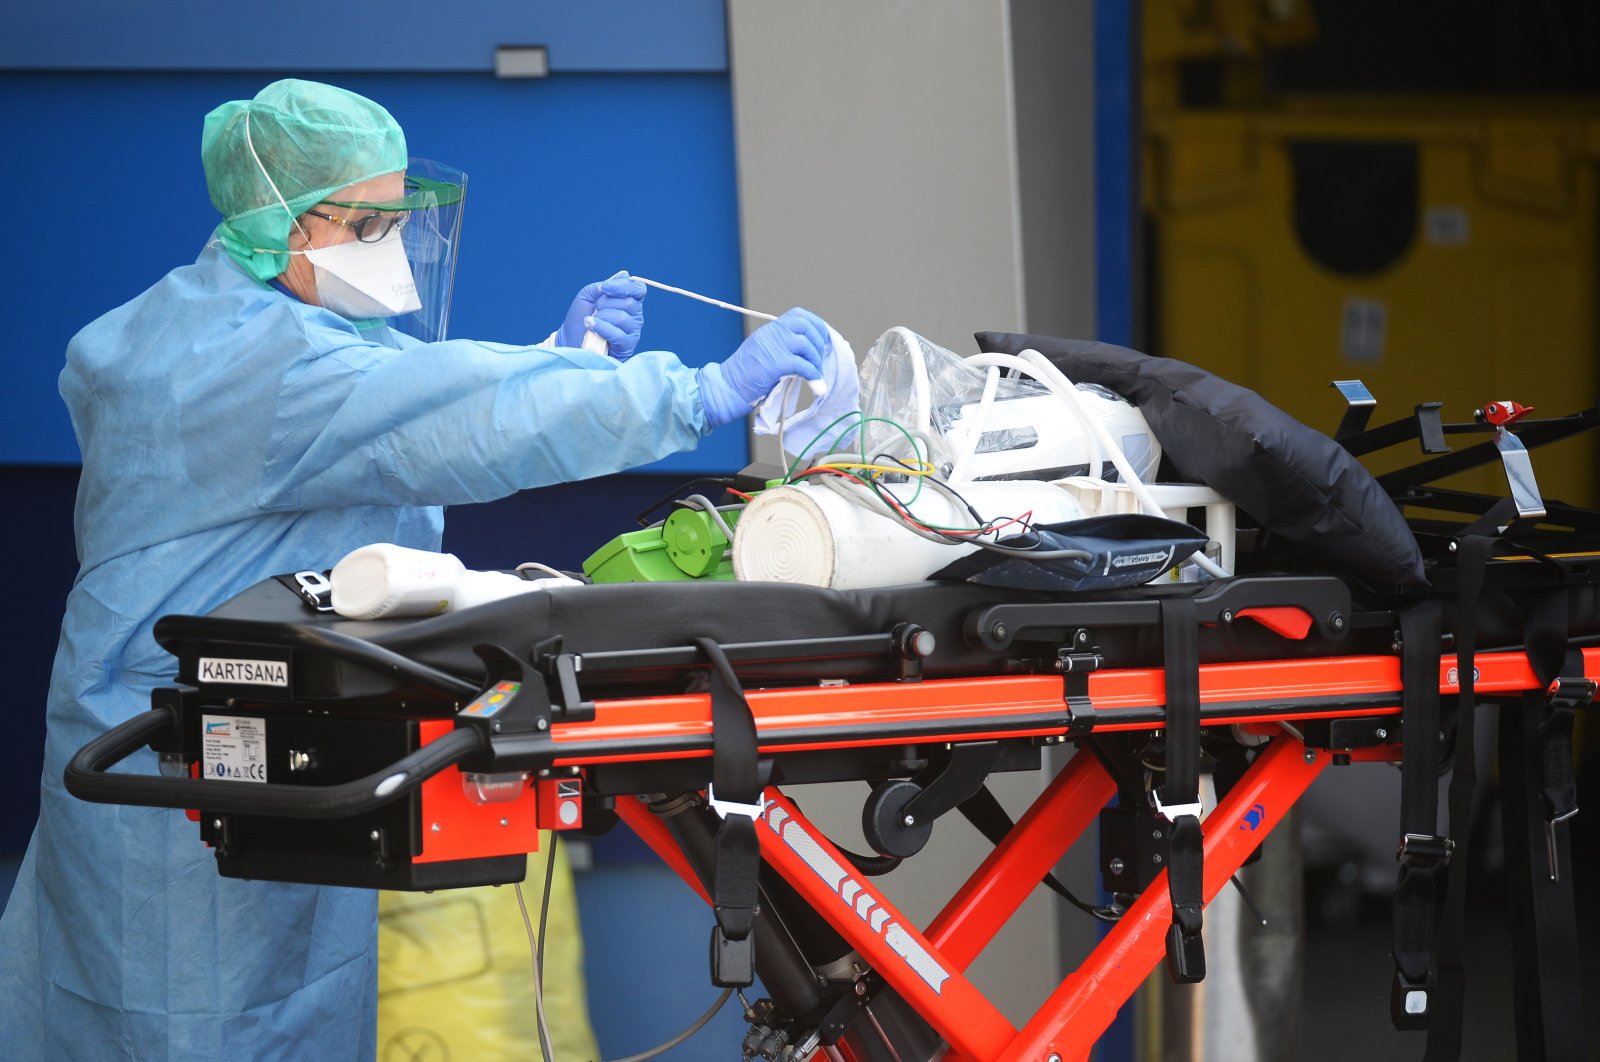 A nurse anesthetist disinfects material of ambulances which carried six coronavirus patients at the Brest hospital, evacuated by air from the French eastern city of Mulhouse, in Brest, western France, on March 24, 2020, on the eight day of a lockdown aimed at curbing the spread of the COVID-19 (novel coronavirus) in France. (AFP Photo)